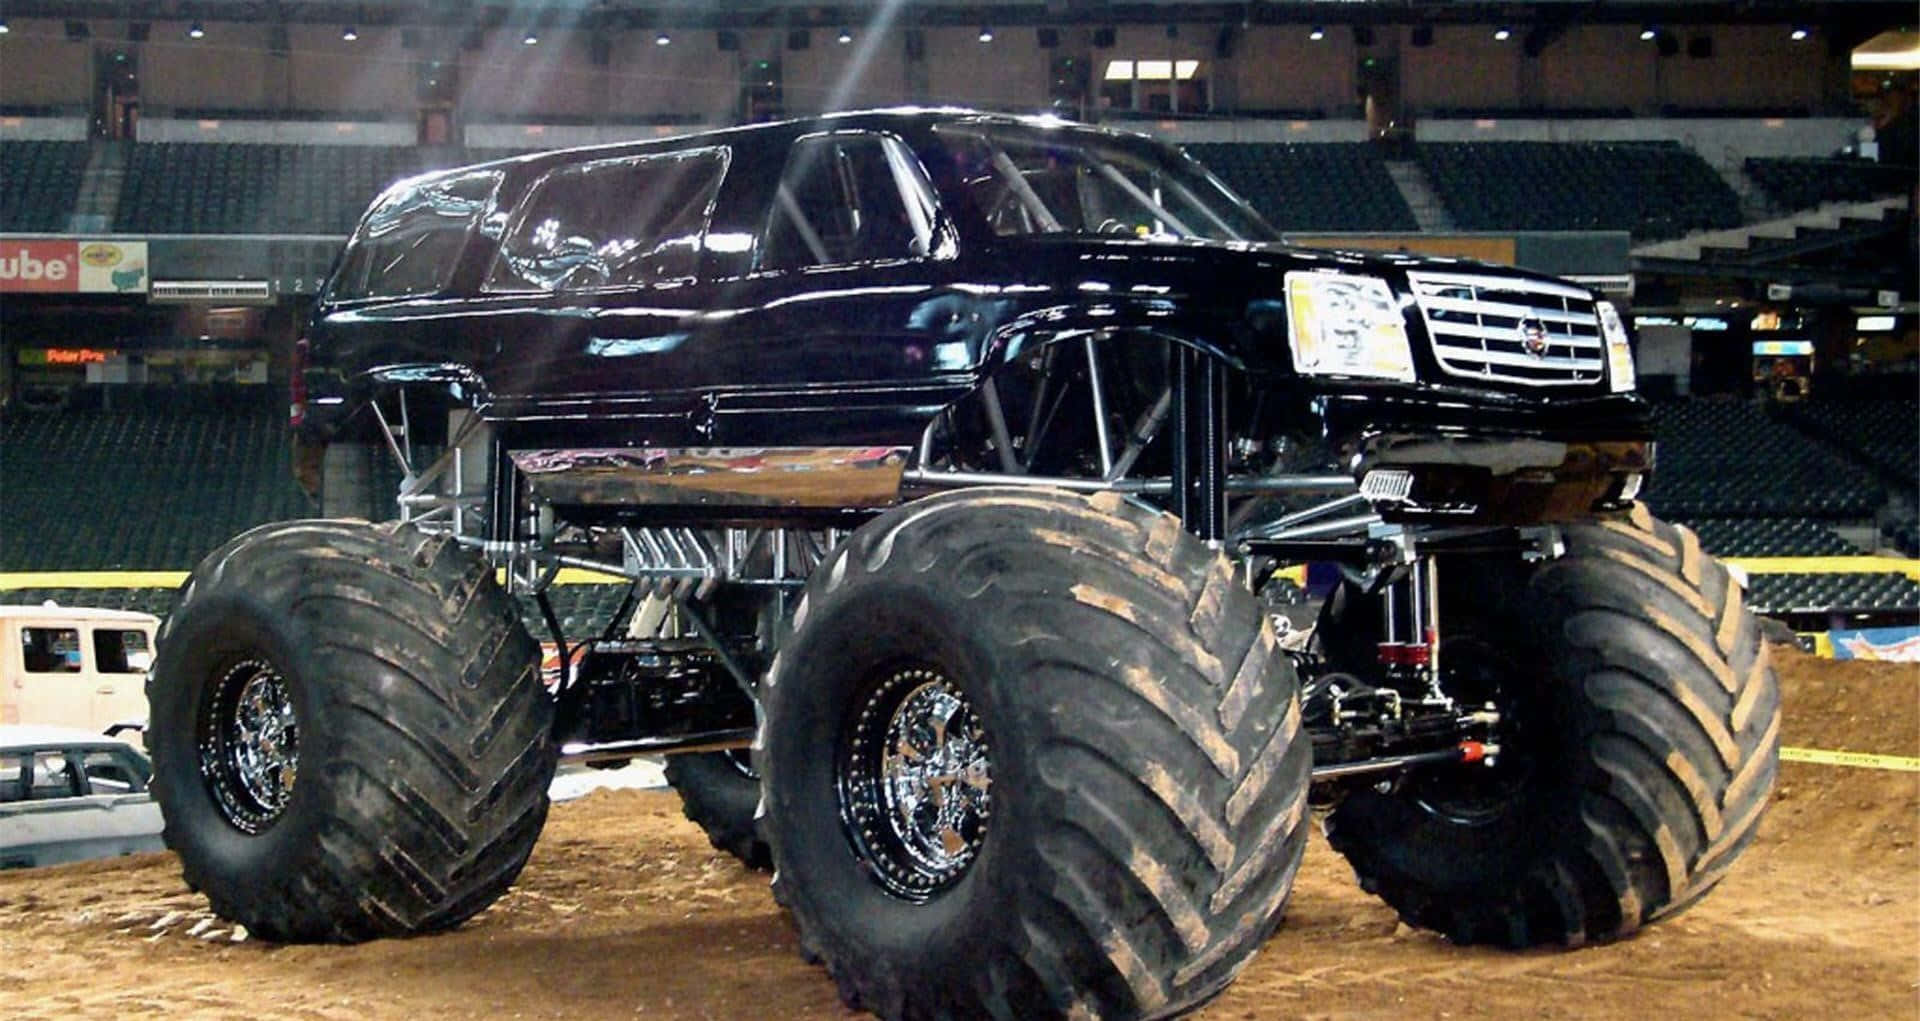 A Black Monster Truck With Large Tires On The Ground